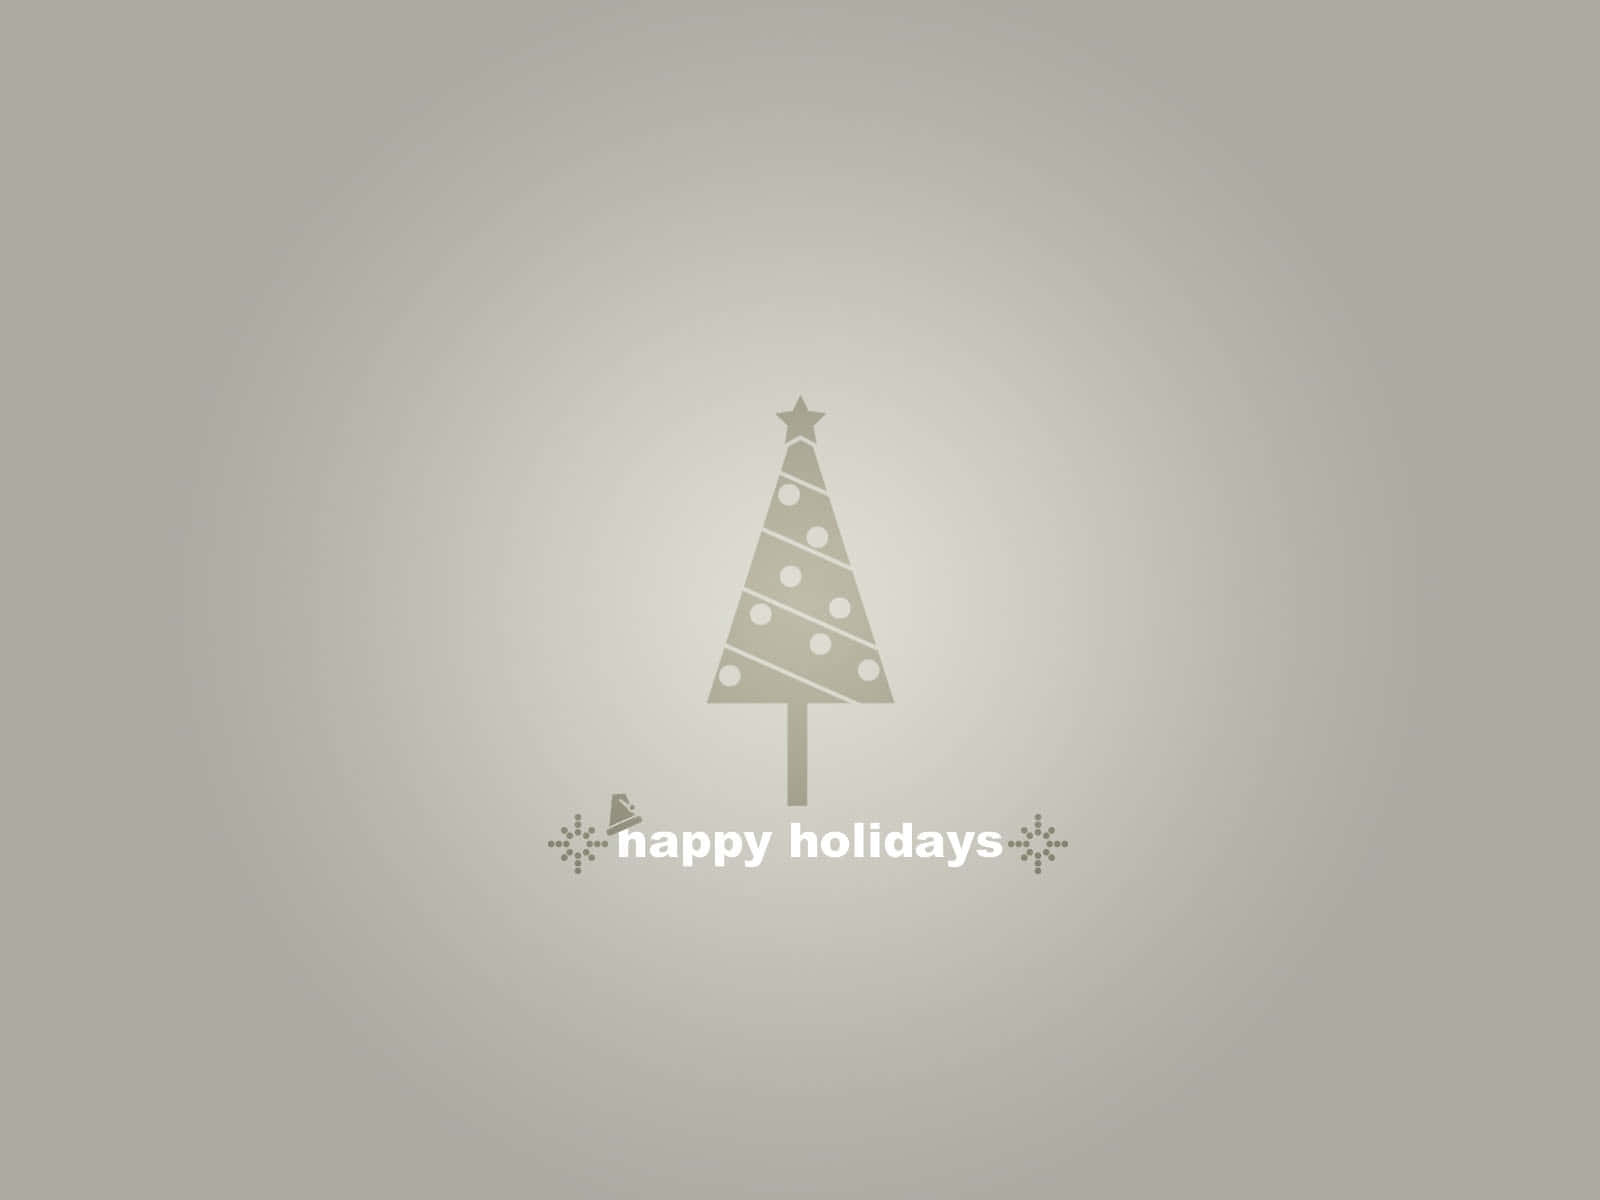 A Christmas Tree With The Words Happy Holidays On It Wallpaper